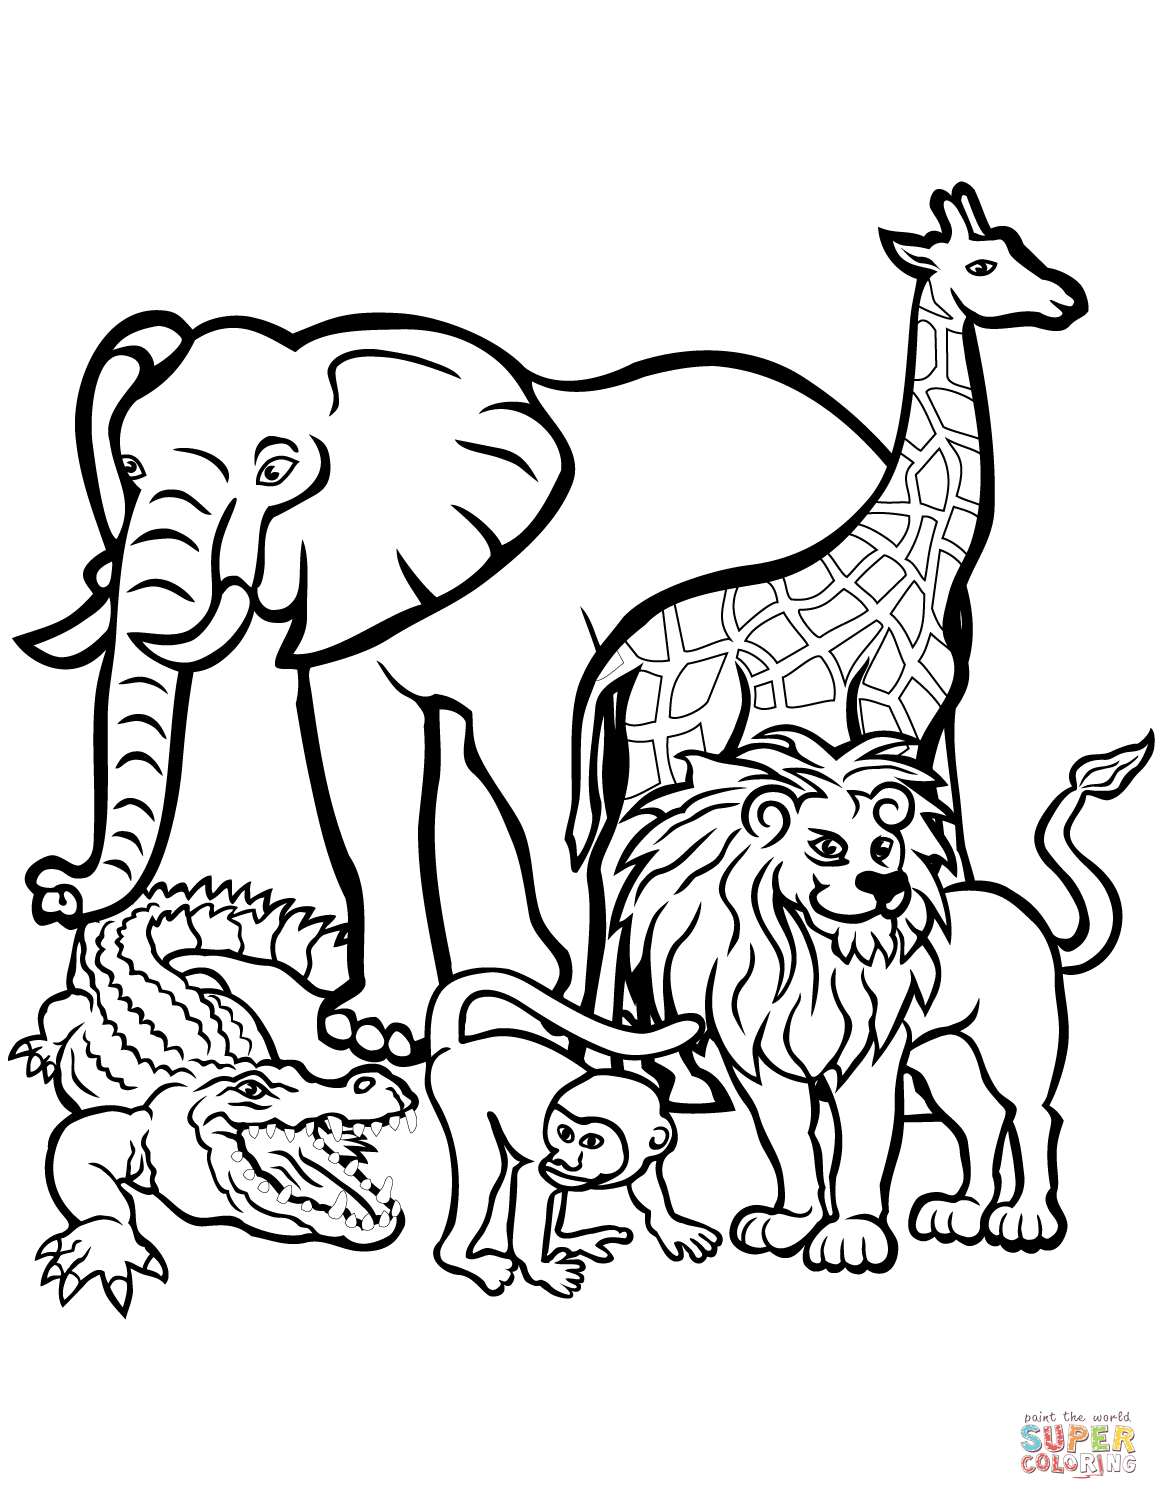 32 Amazing Free Printable Animal Coloring Pages Image Ideas – azspring